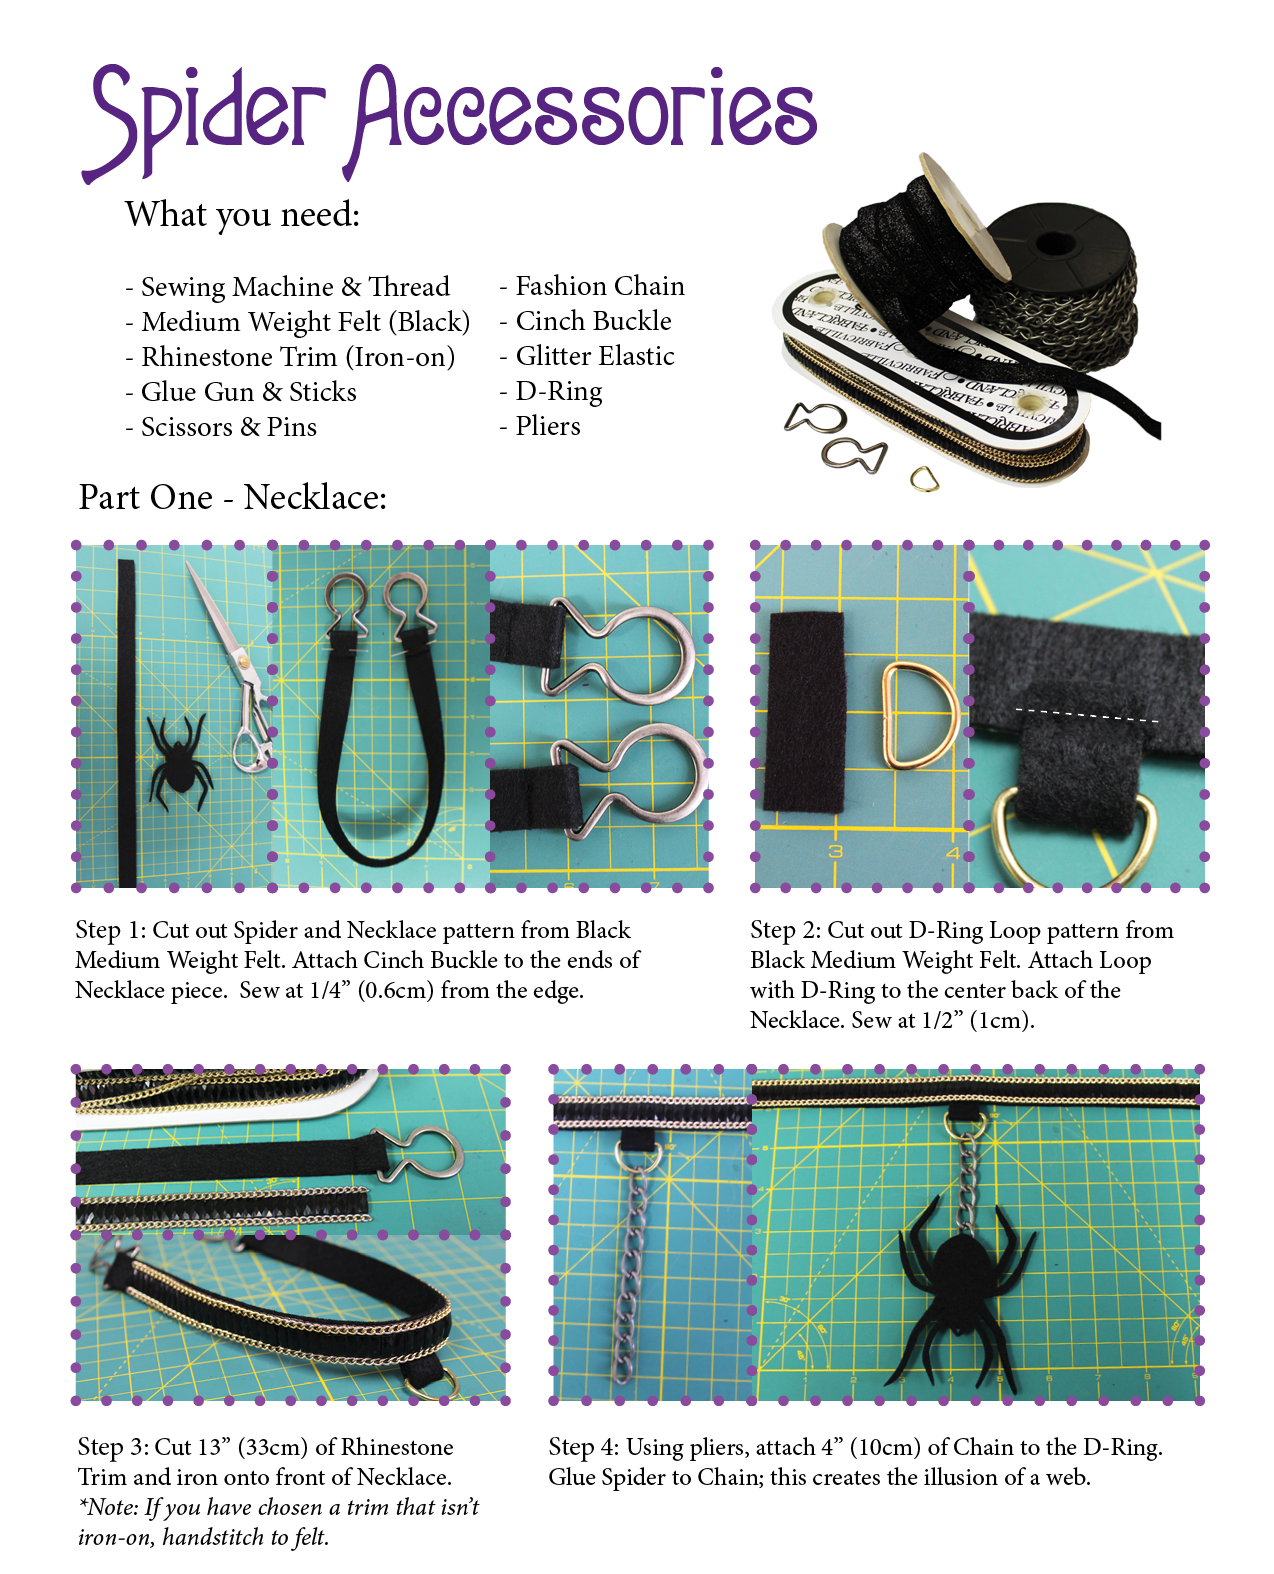 First set of steps to creating your own Spider Fashion Accessories